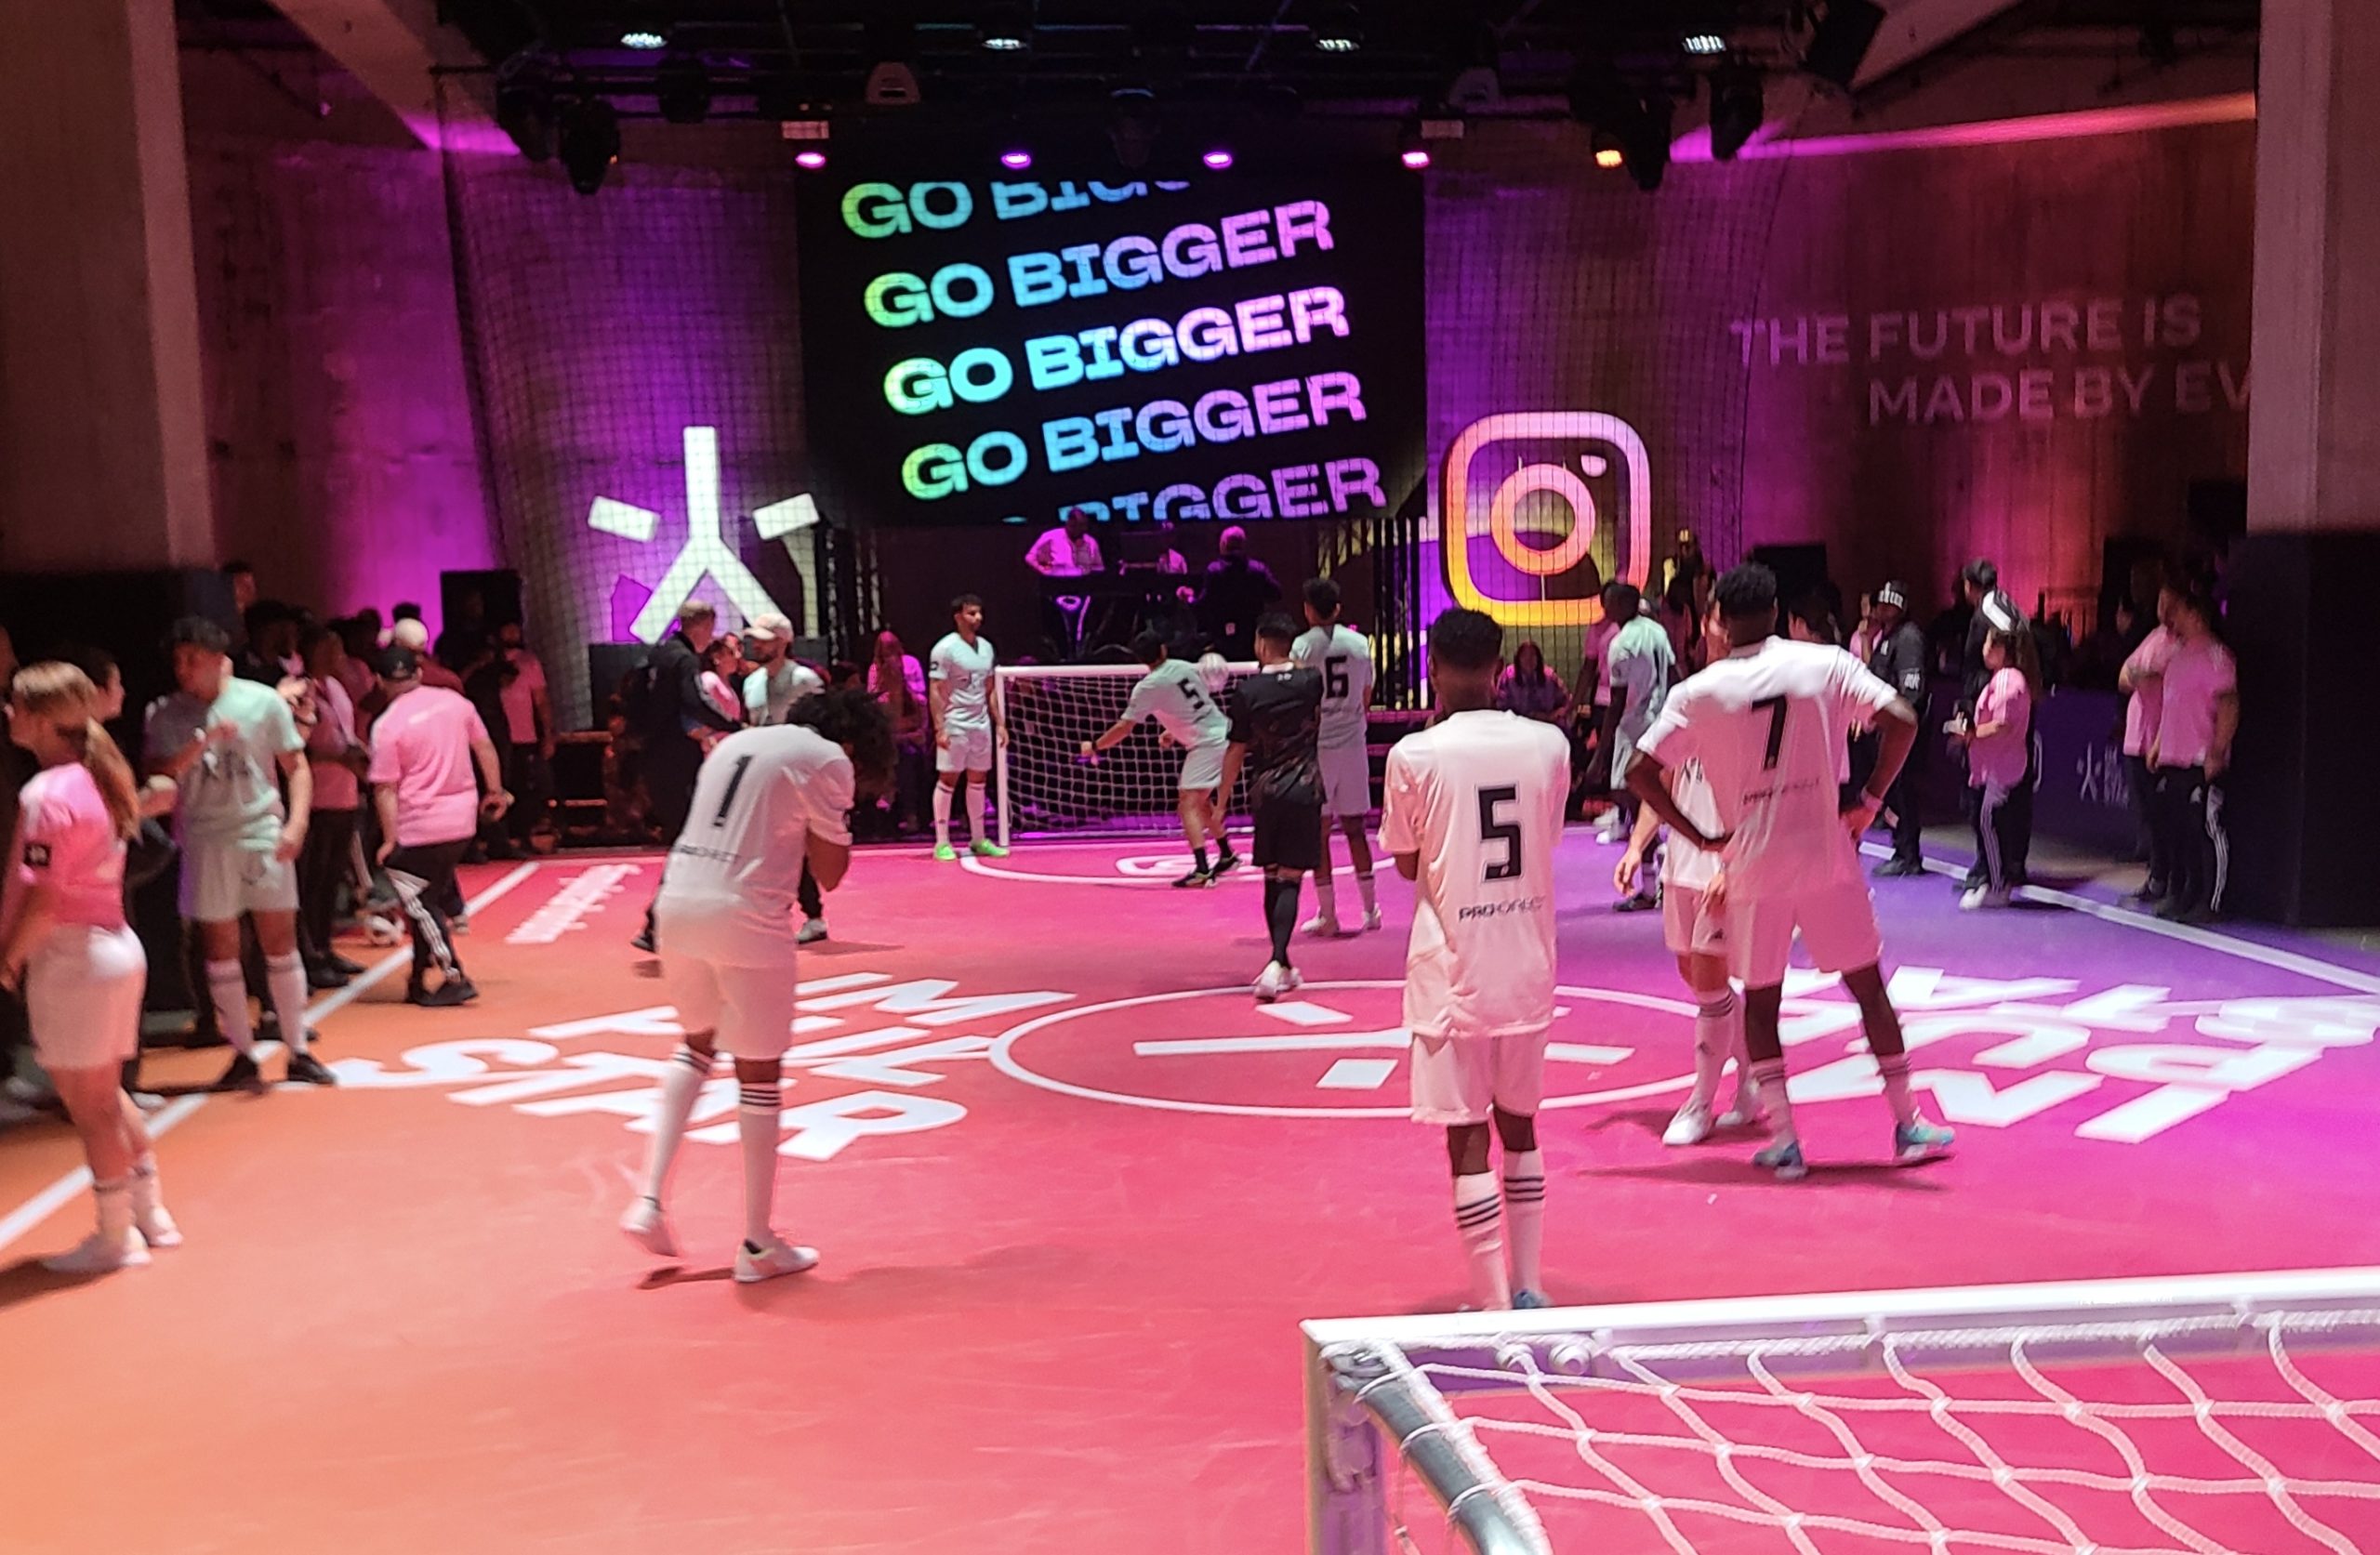 Soccer players on a pink and orange indoor pitch with an Instagram logo and Jellysmack's Go Bigger tagline in the background